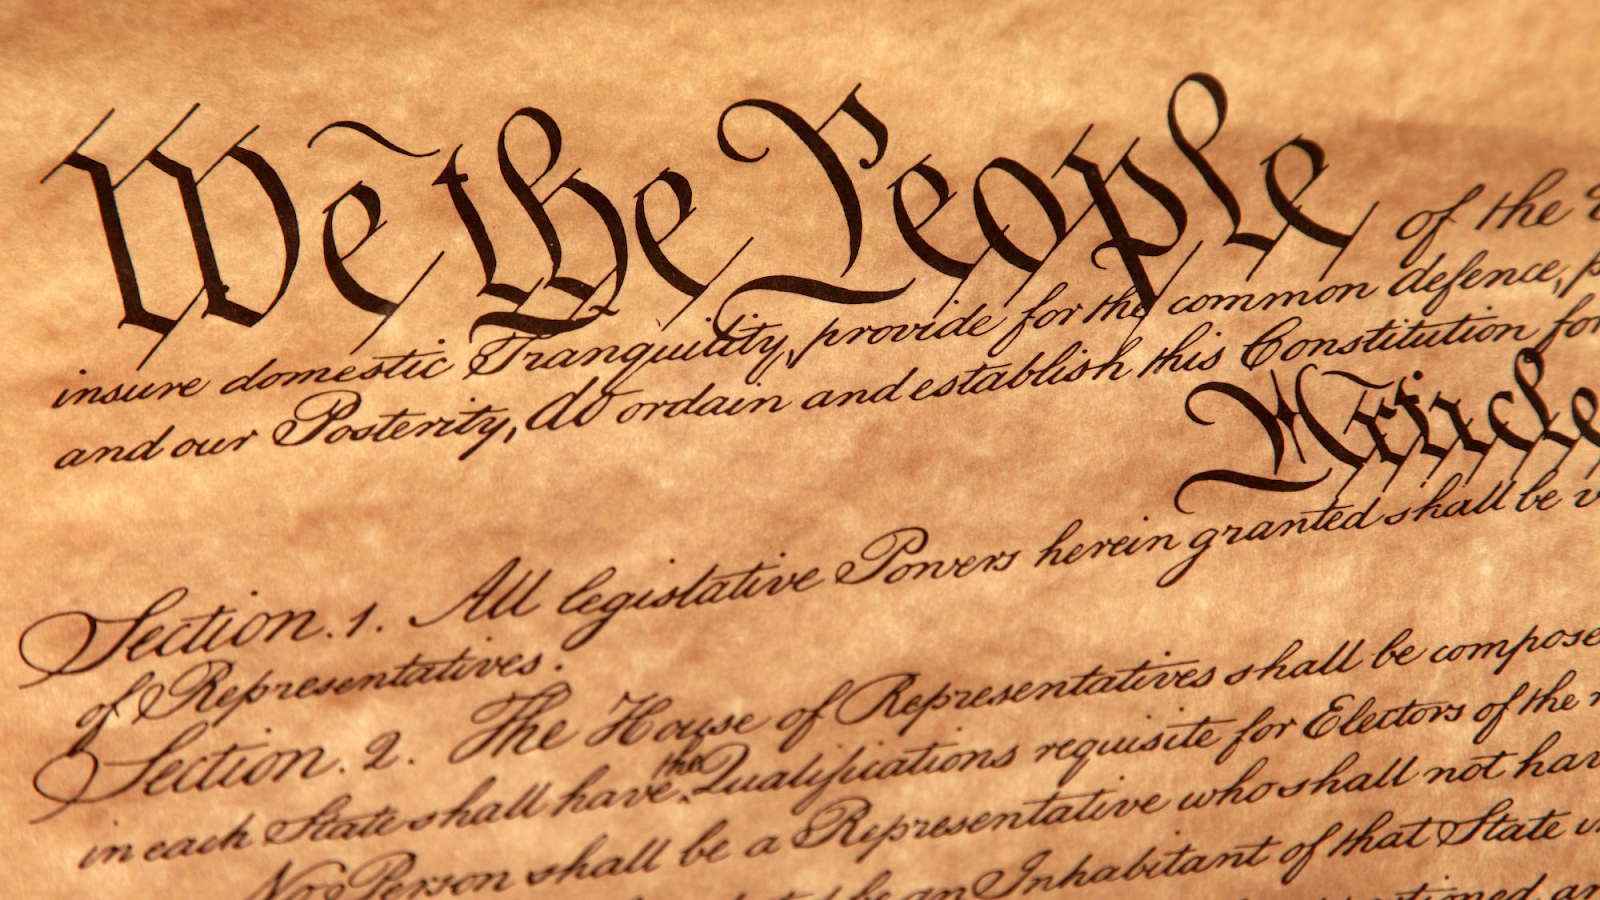 Opinion: It's Time to Repeal the Third Amendment